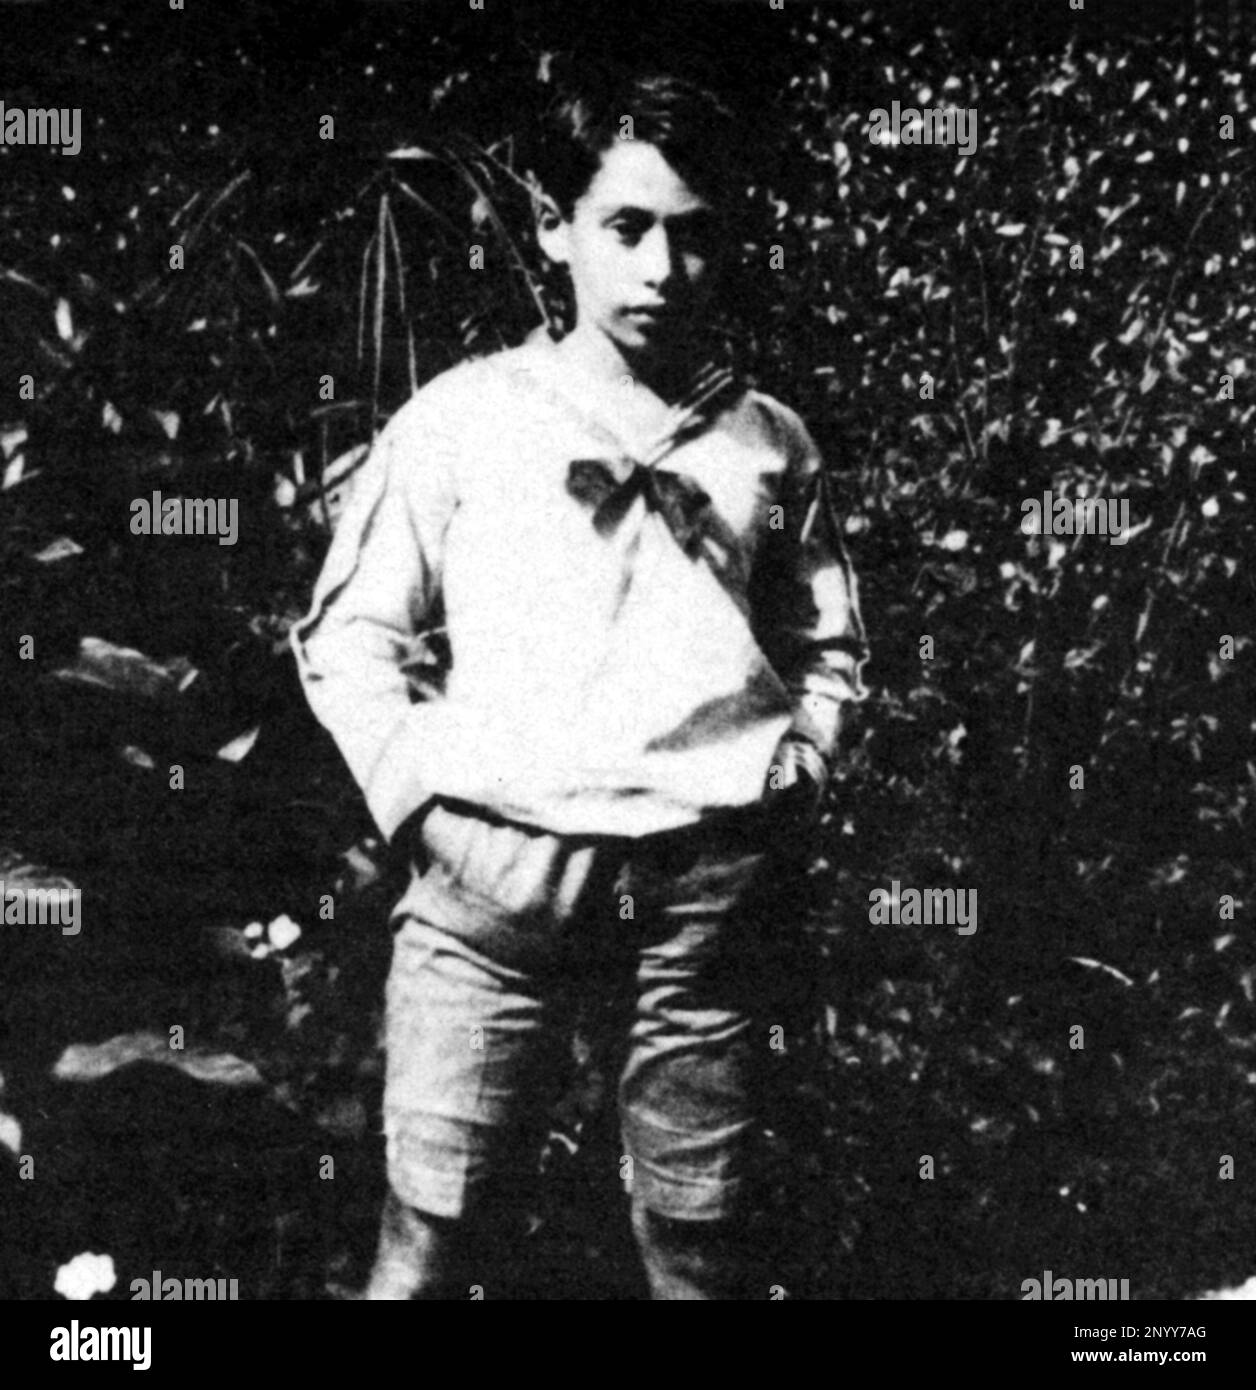 1918 , Trieste , Italy : The celebrated italo-american art dealer gallerist LEO CASTELLI  ( 1907 , Trieste , Italy - 21 august 1999 , New York ) when was a little boy aged 11 in the garden of the Villa , Via Michelangelo . Friend of Pop Artists  and expecially Andy Warhol and Robert Rauschenberg . Son of the jewish hungarian banker Ernesto Krauss , married to art dealer Ileana Shapira ( later Sonnabend ) in Bucharest during the 30's - personalità celebrità da giovane piccolo bambino bambini piccoli - celebrity celebrities personality personalities children young youngs - little child - ARTE - Stock Photo